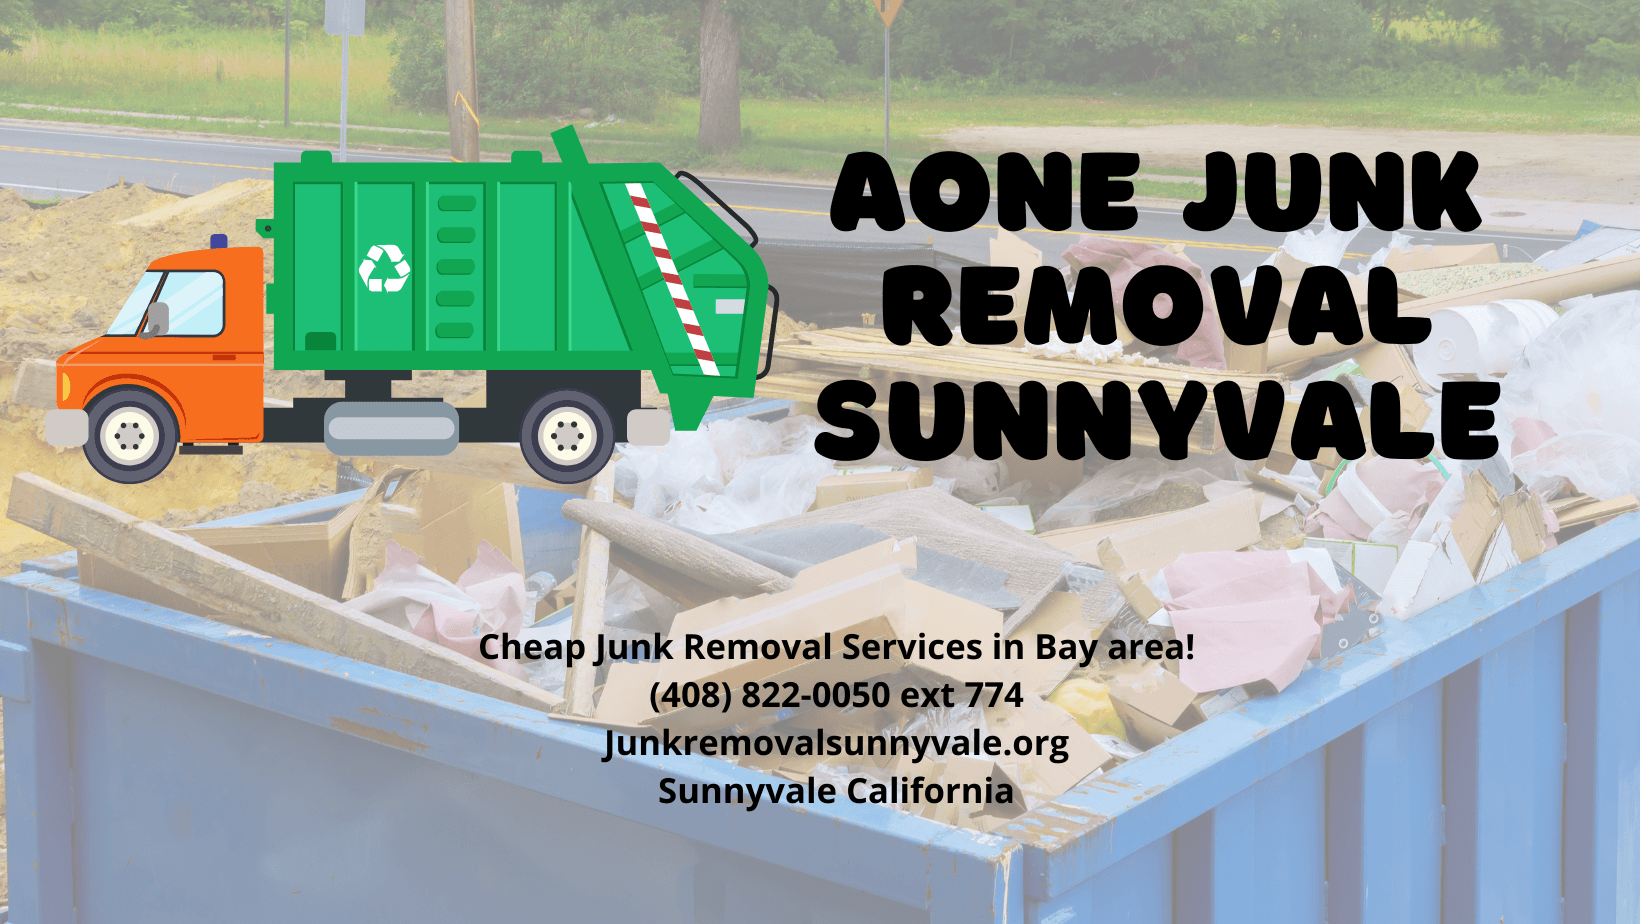 Aone Junk Removal Sunnyvale-Home